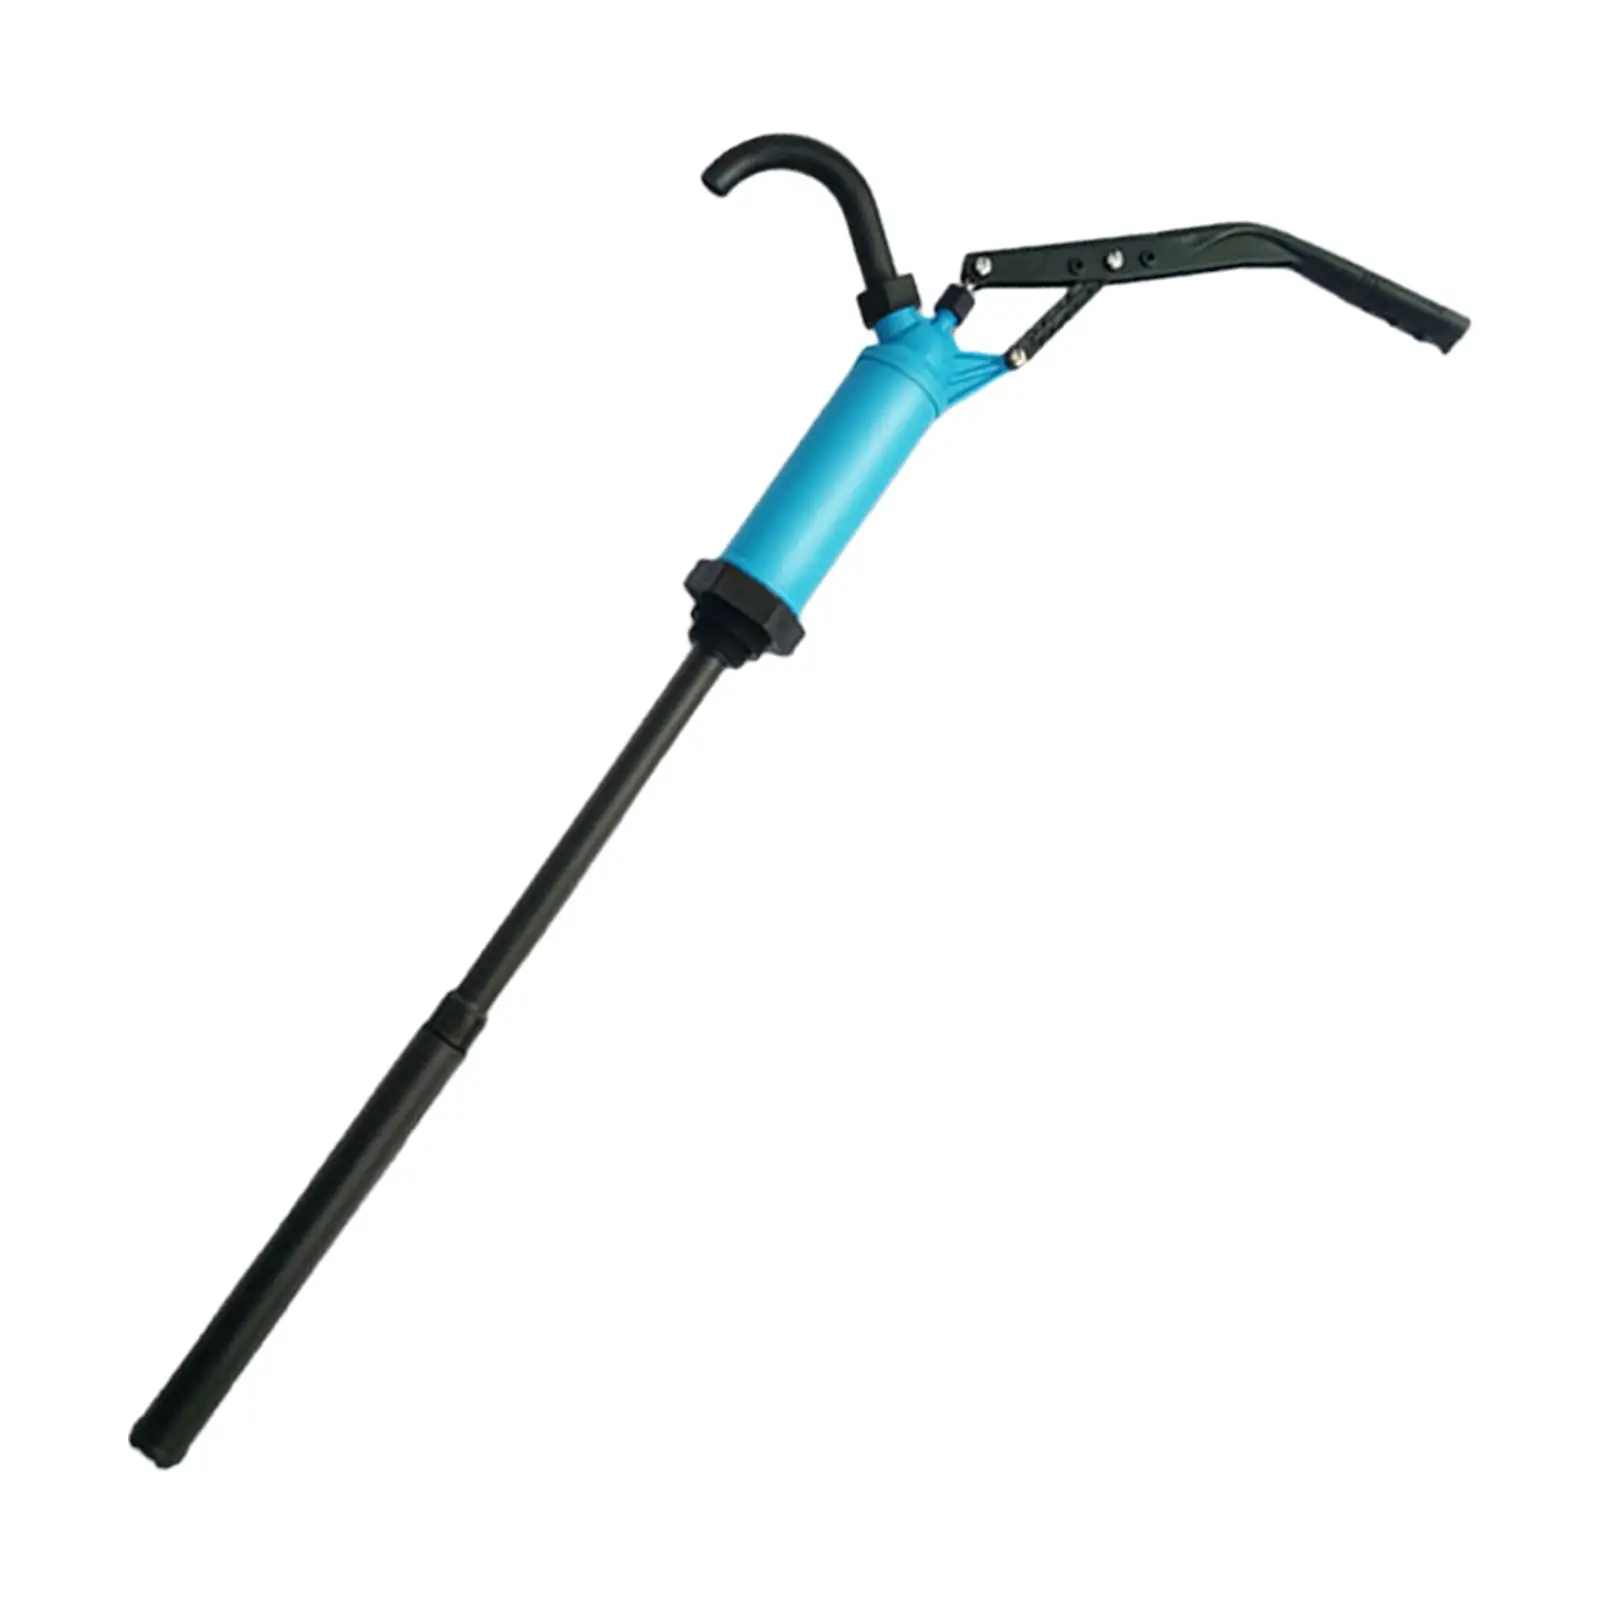 Barrel Pump with Lever Action Portable Hose Assembly Tool Non Slip Handle Oil Drum Barrel Hand Pump for Petrol Transfer Water